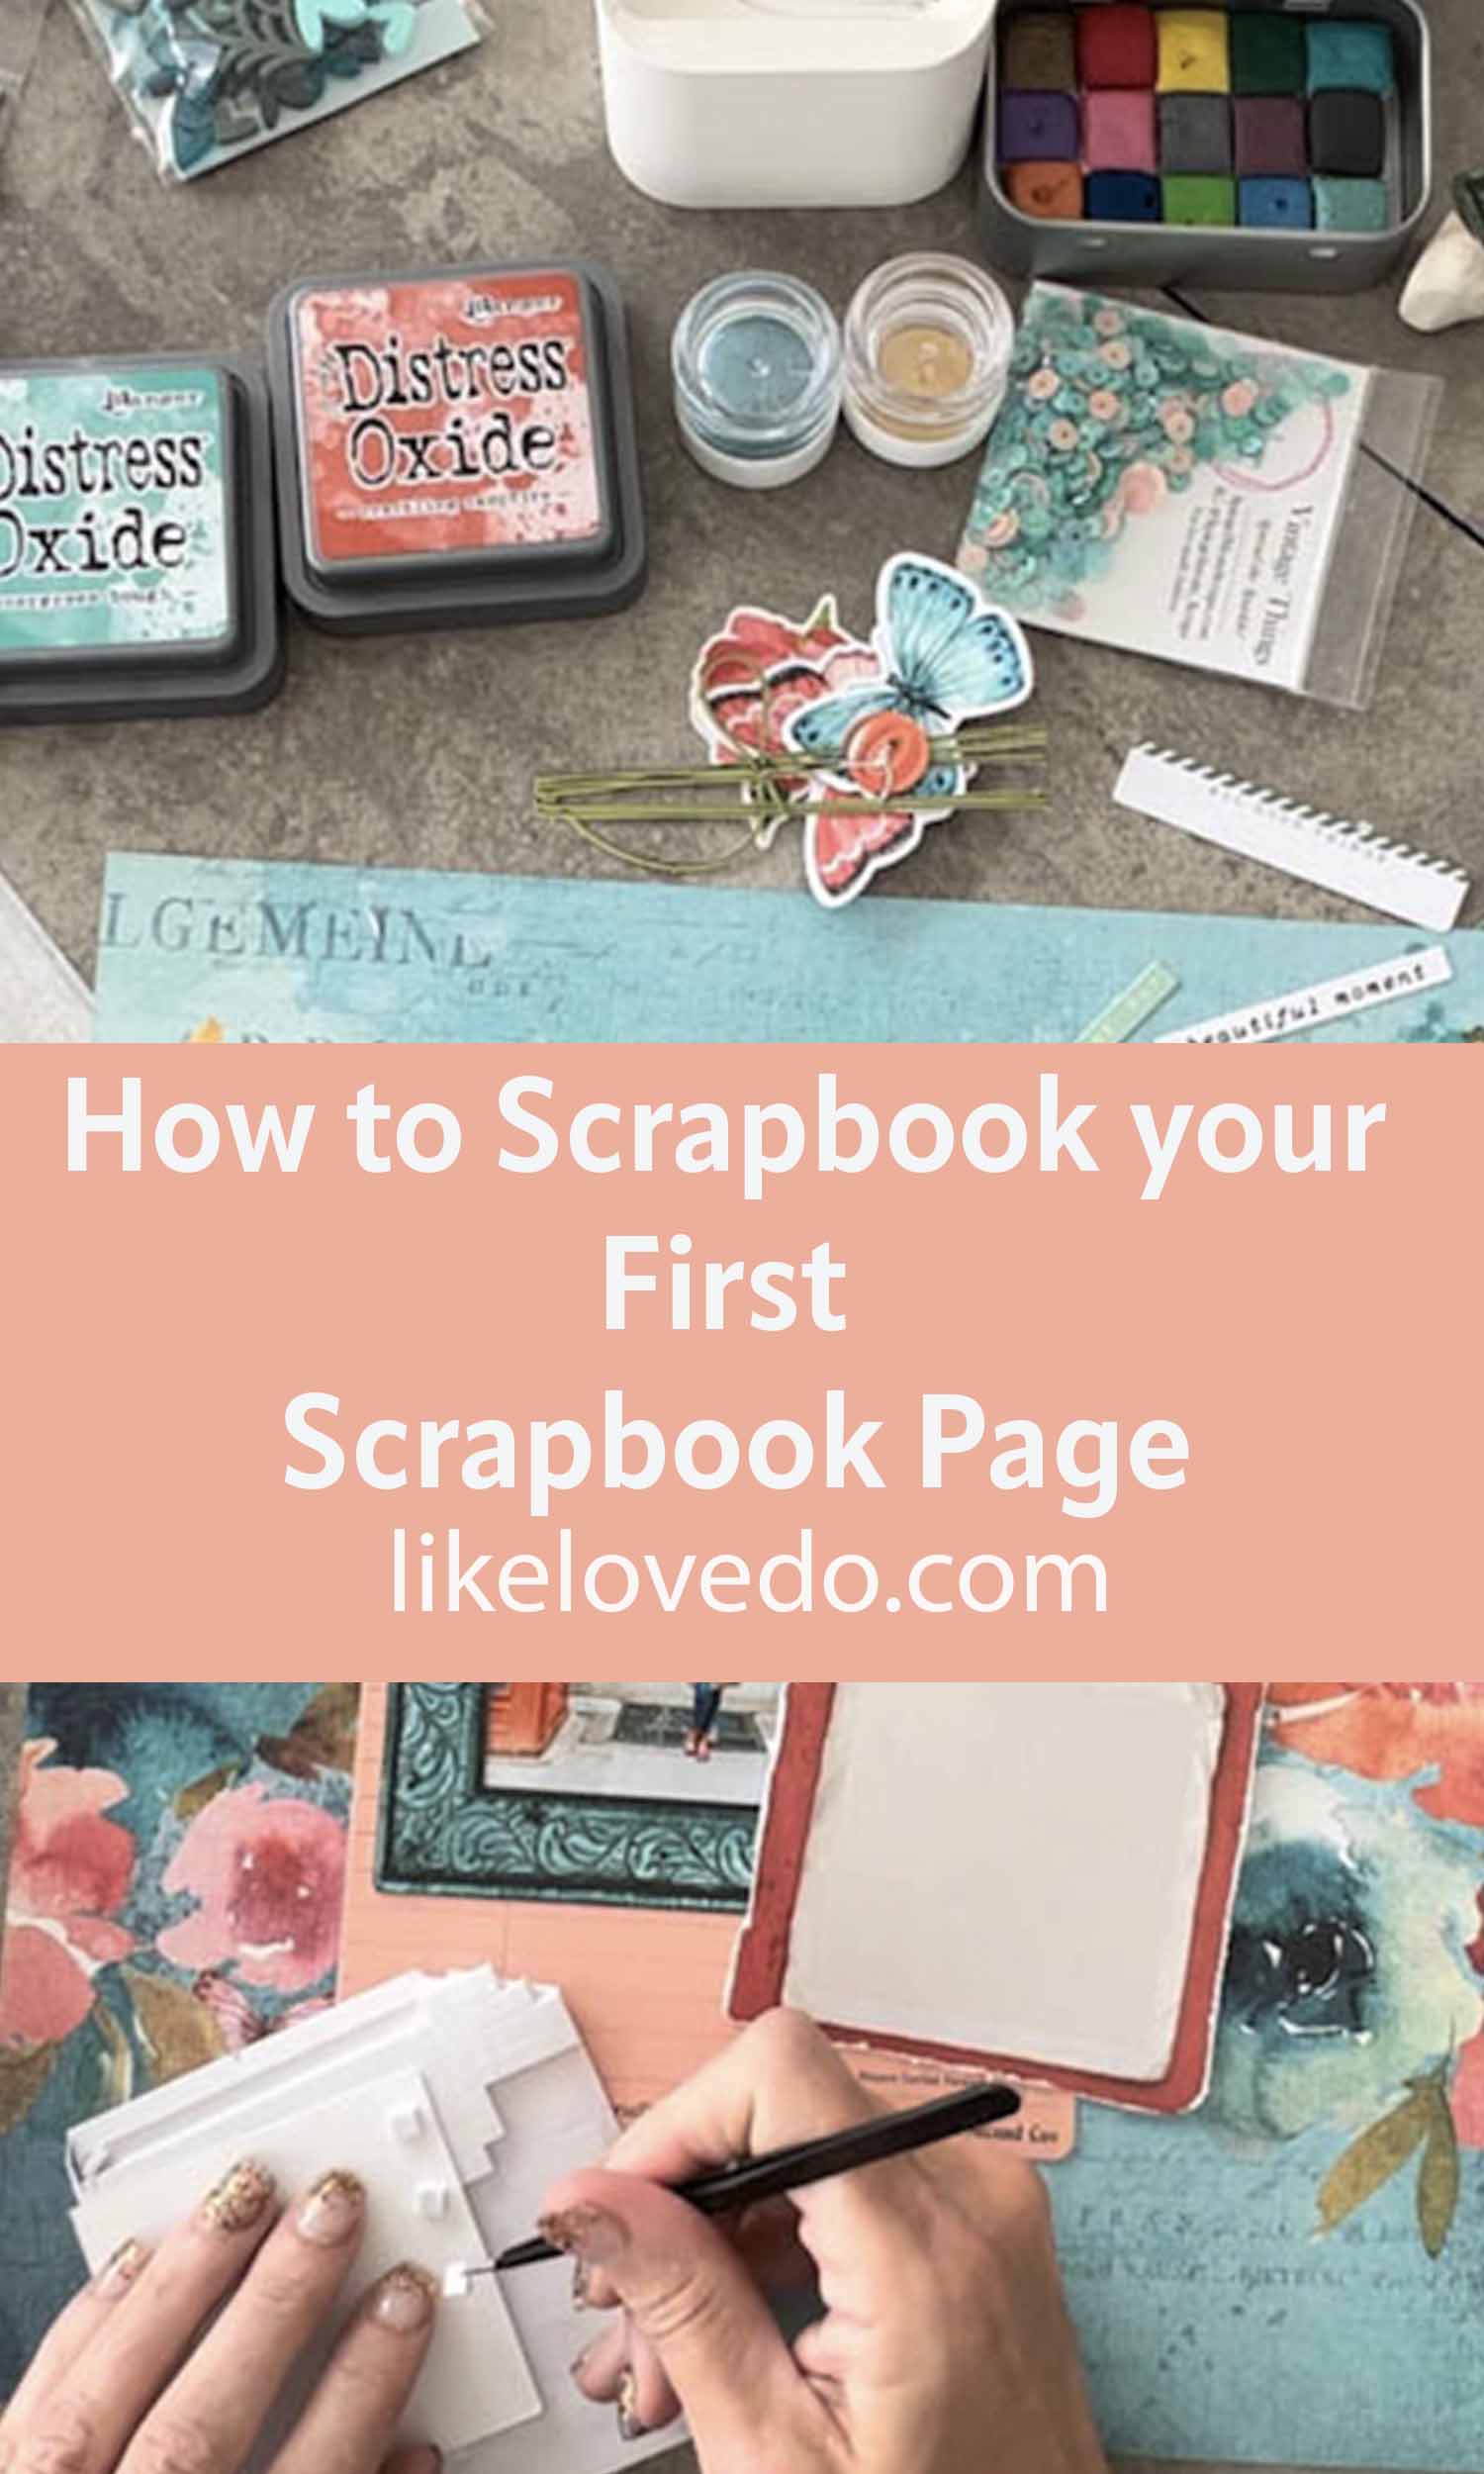 How to Scrapbook your First Page